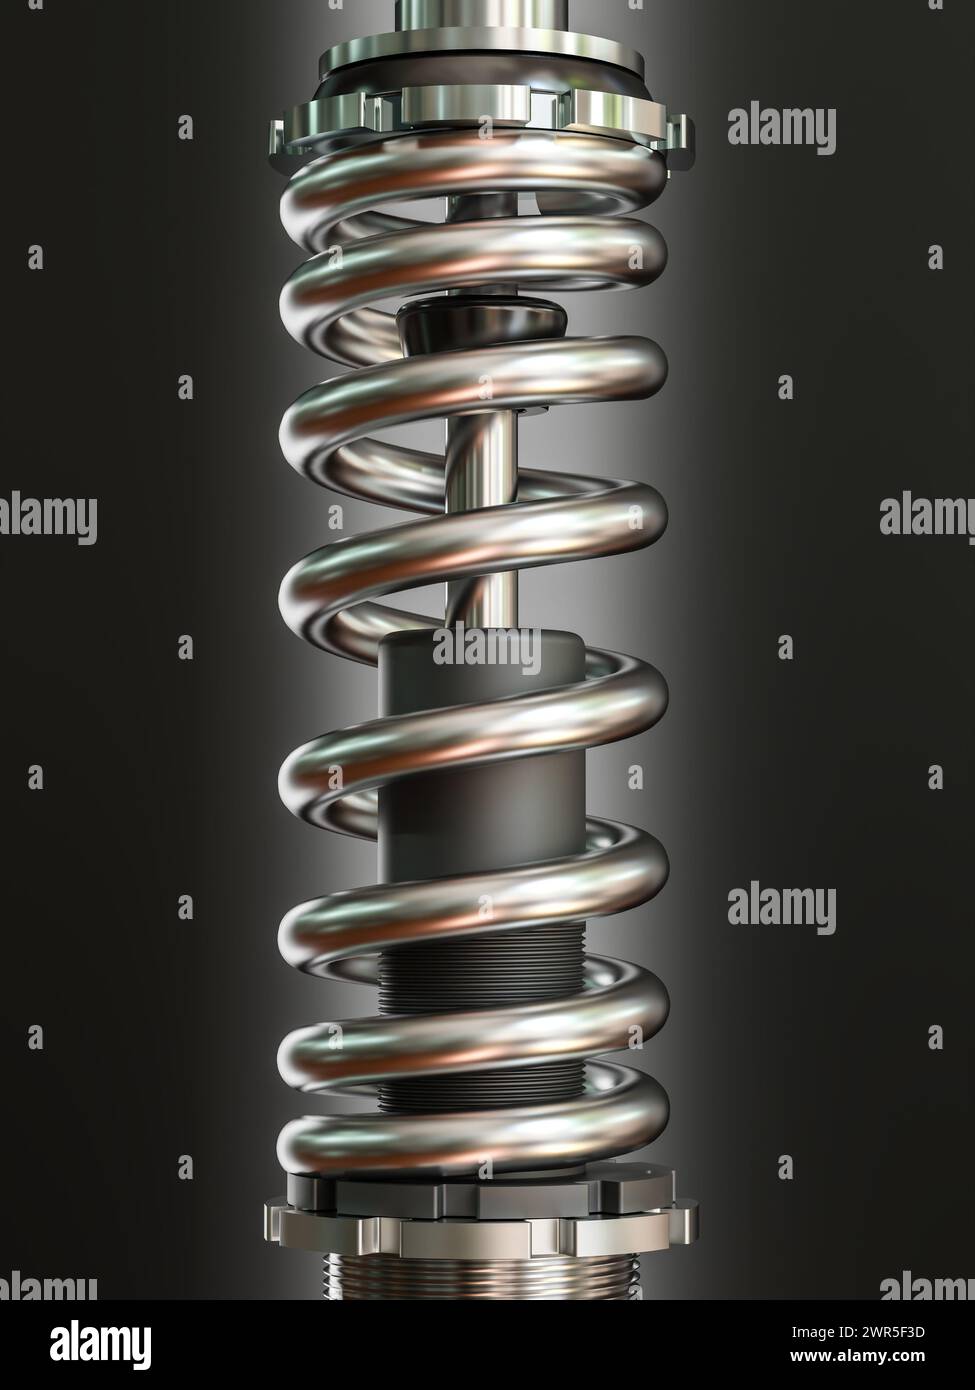 3d rendering of a highly detailed metal coil spring with a sleek design Stock Photo